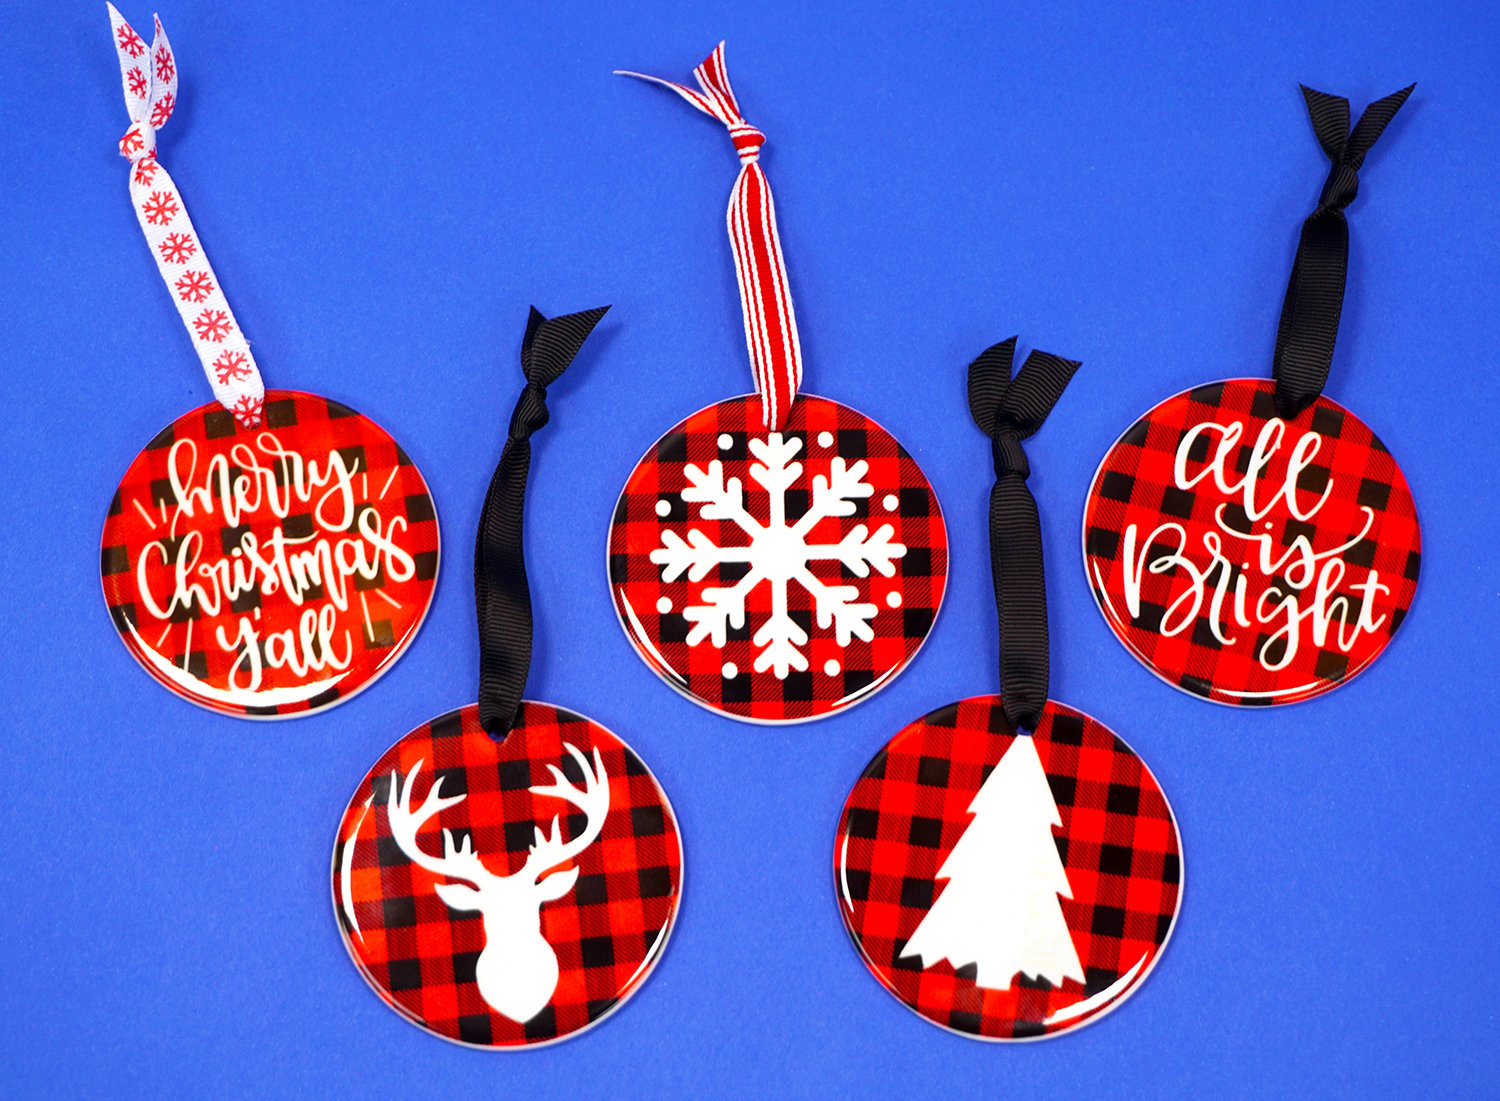 ornaments with strings tied from them